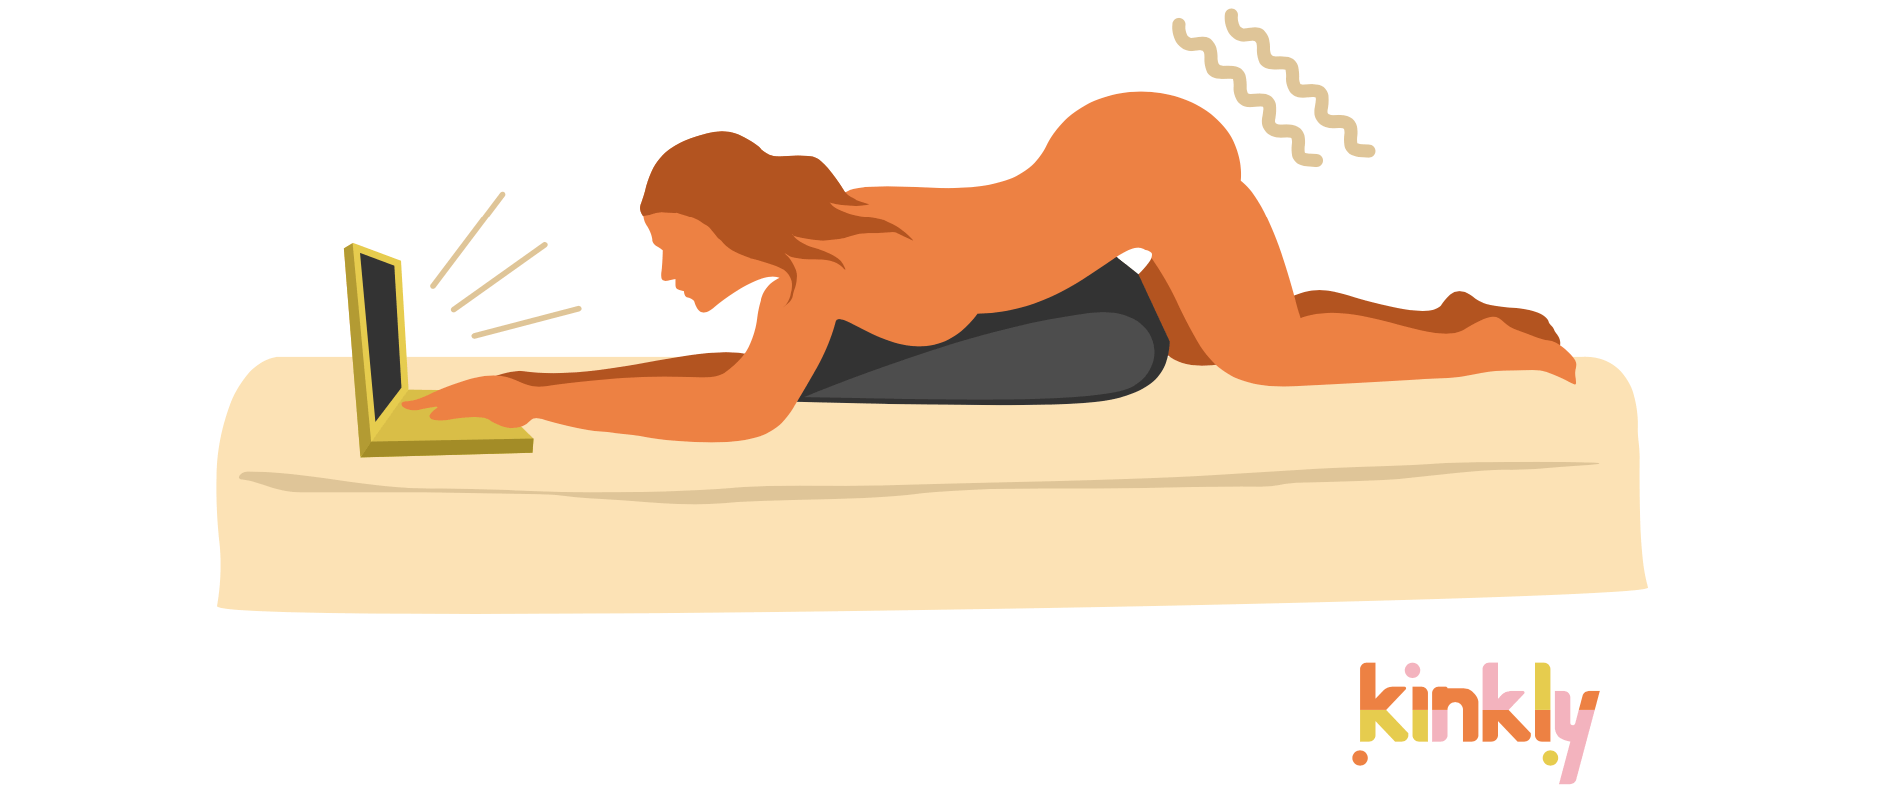 A solo person is laying down on their stomach. A triangular piece of sex furniture is propped underneath them, holding a vibrator between their thighs. The person uses their laptop with both hands as the sex furniture is holding the vibrator in place for them..